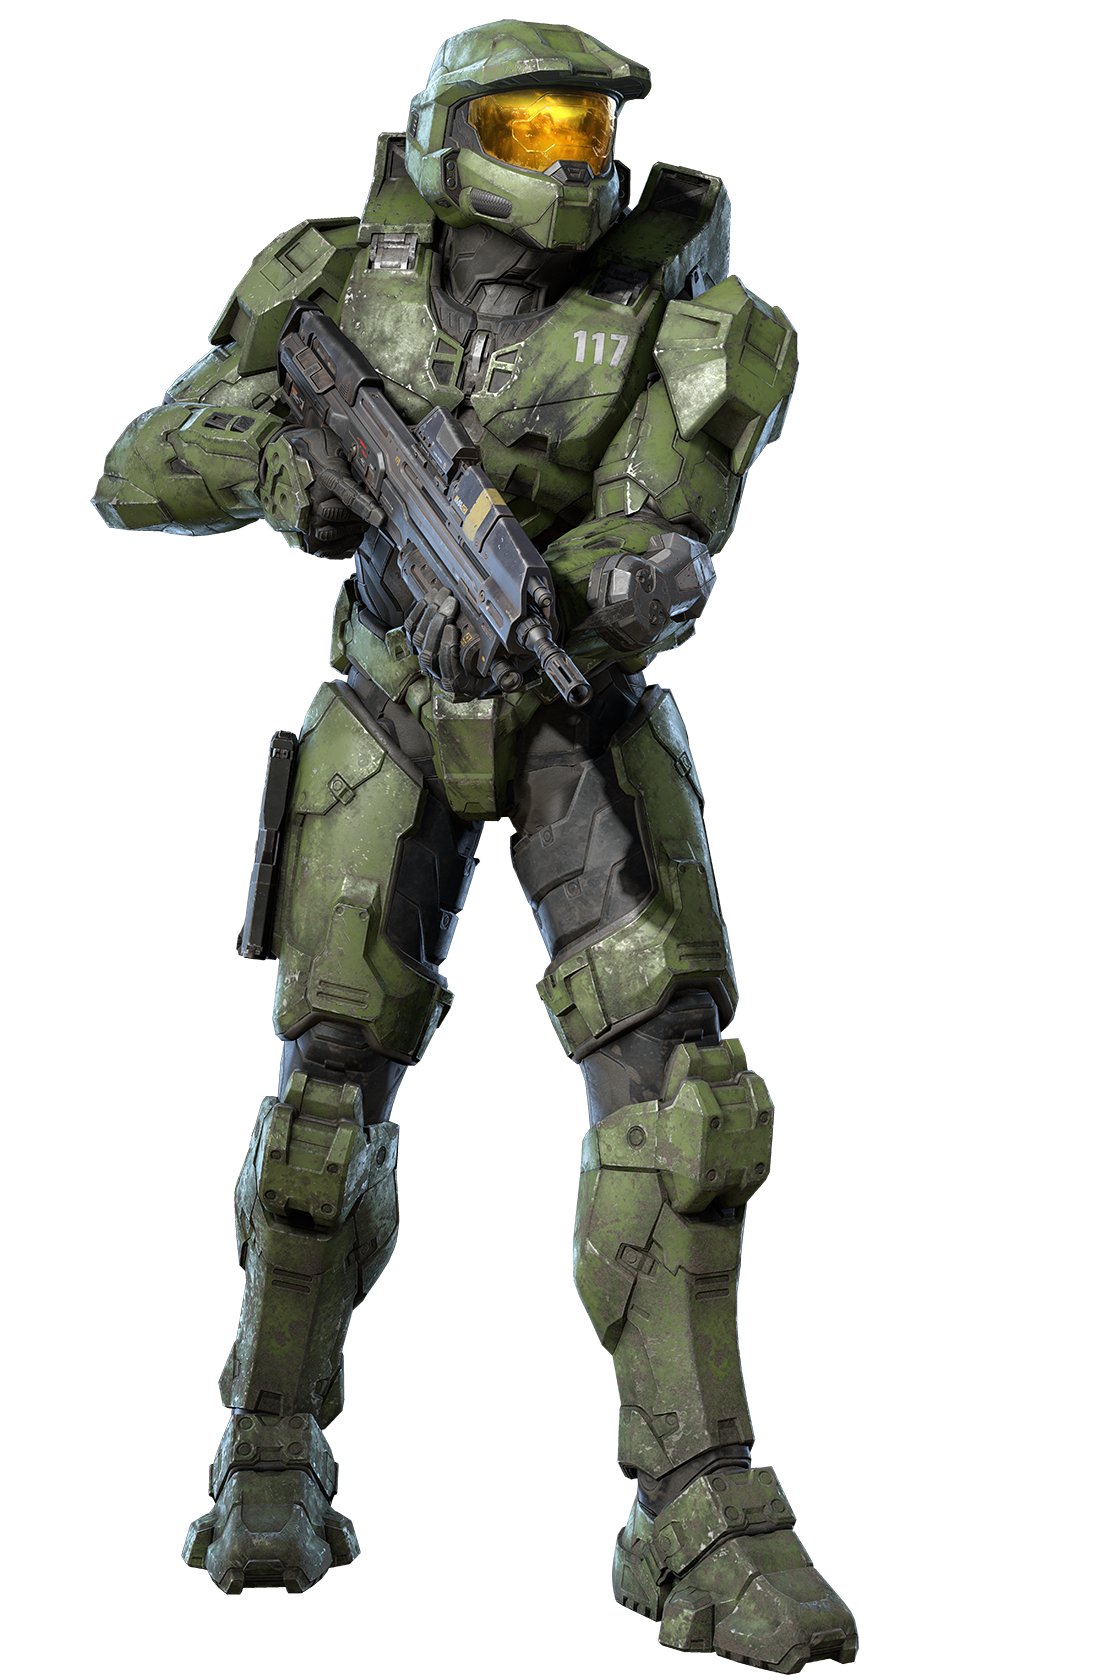 Master Chiefs Halo Infinite Armor Is Definitely More Battle Damaged